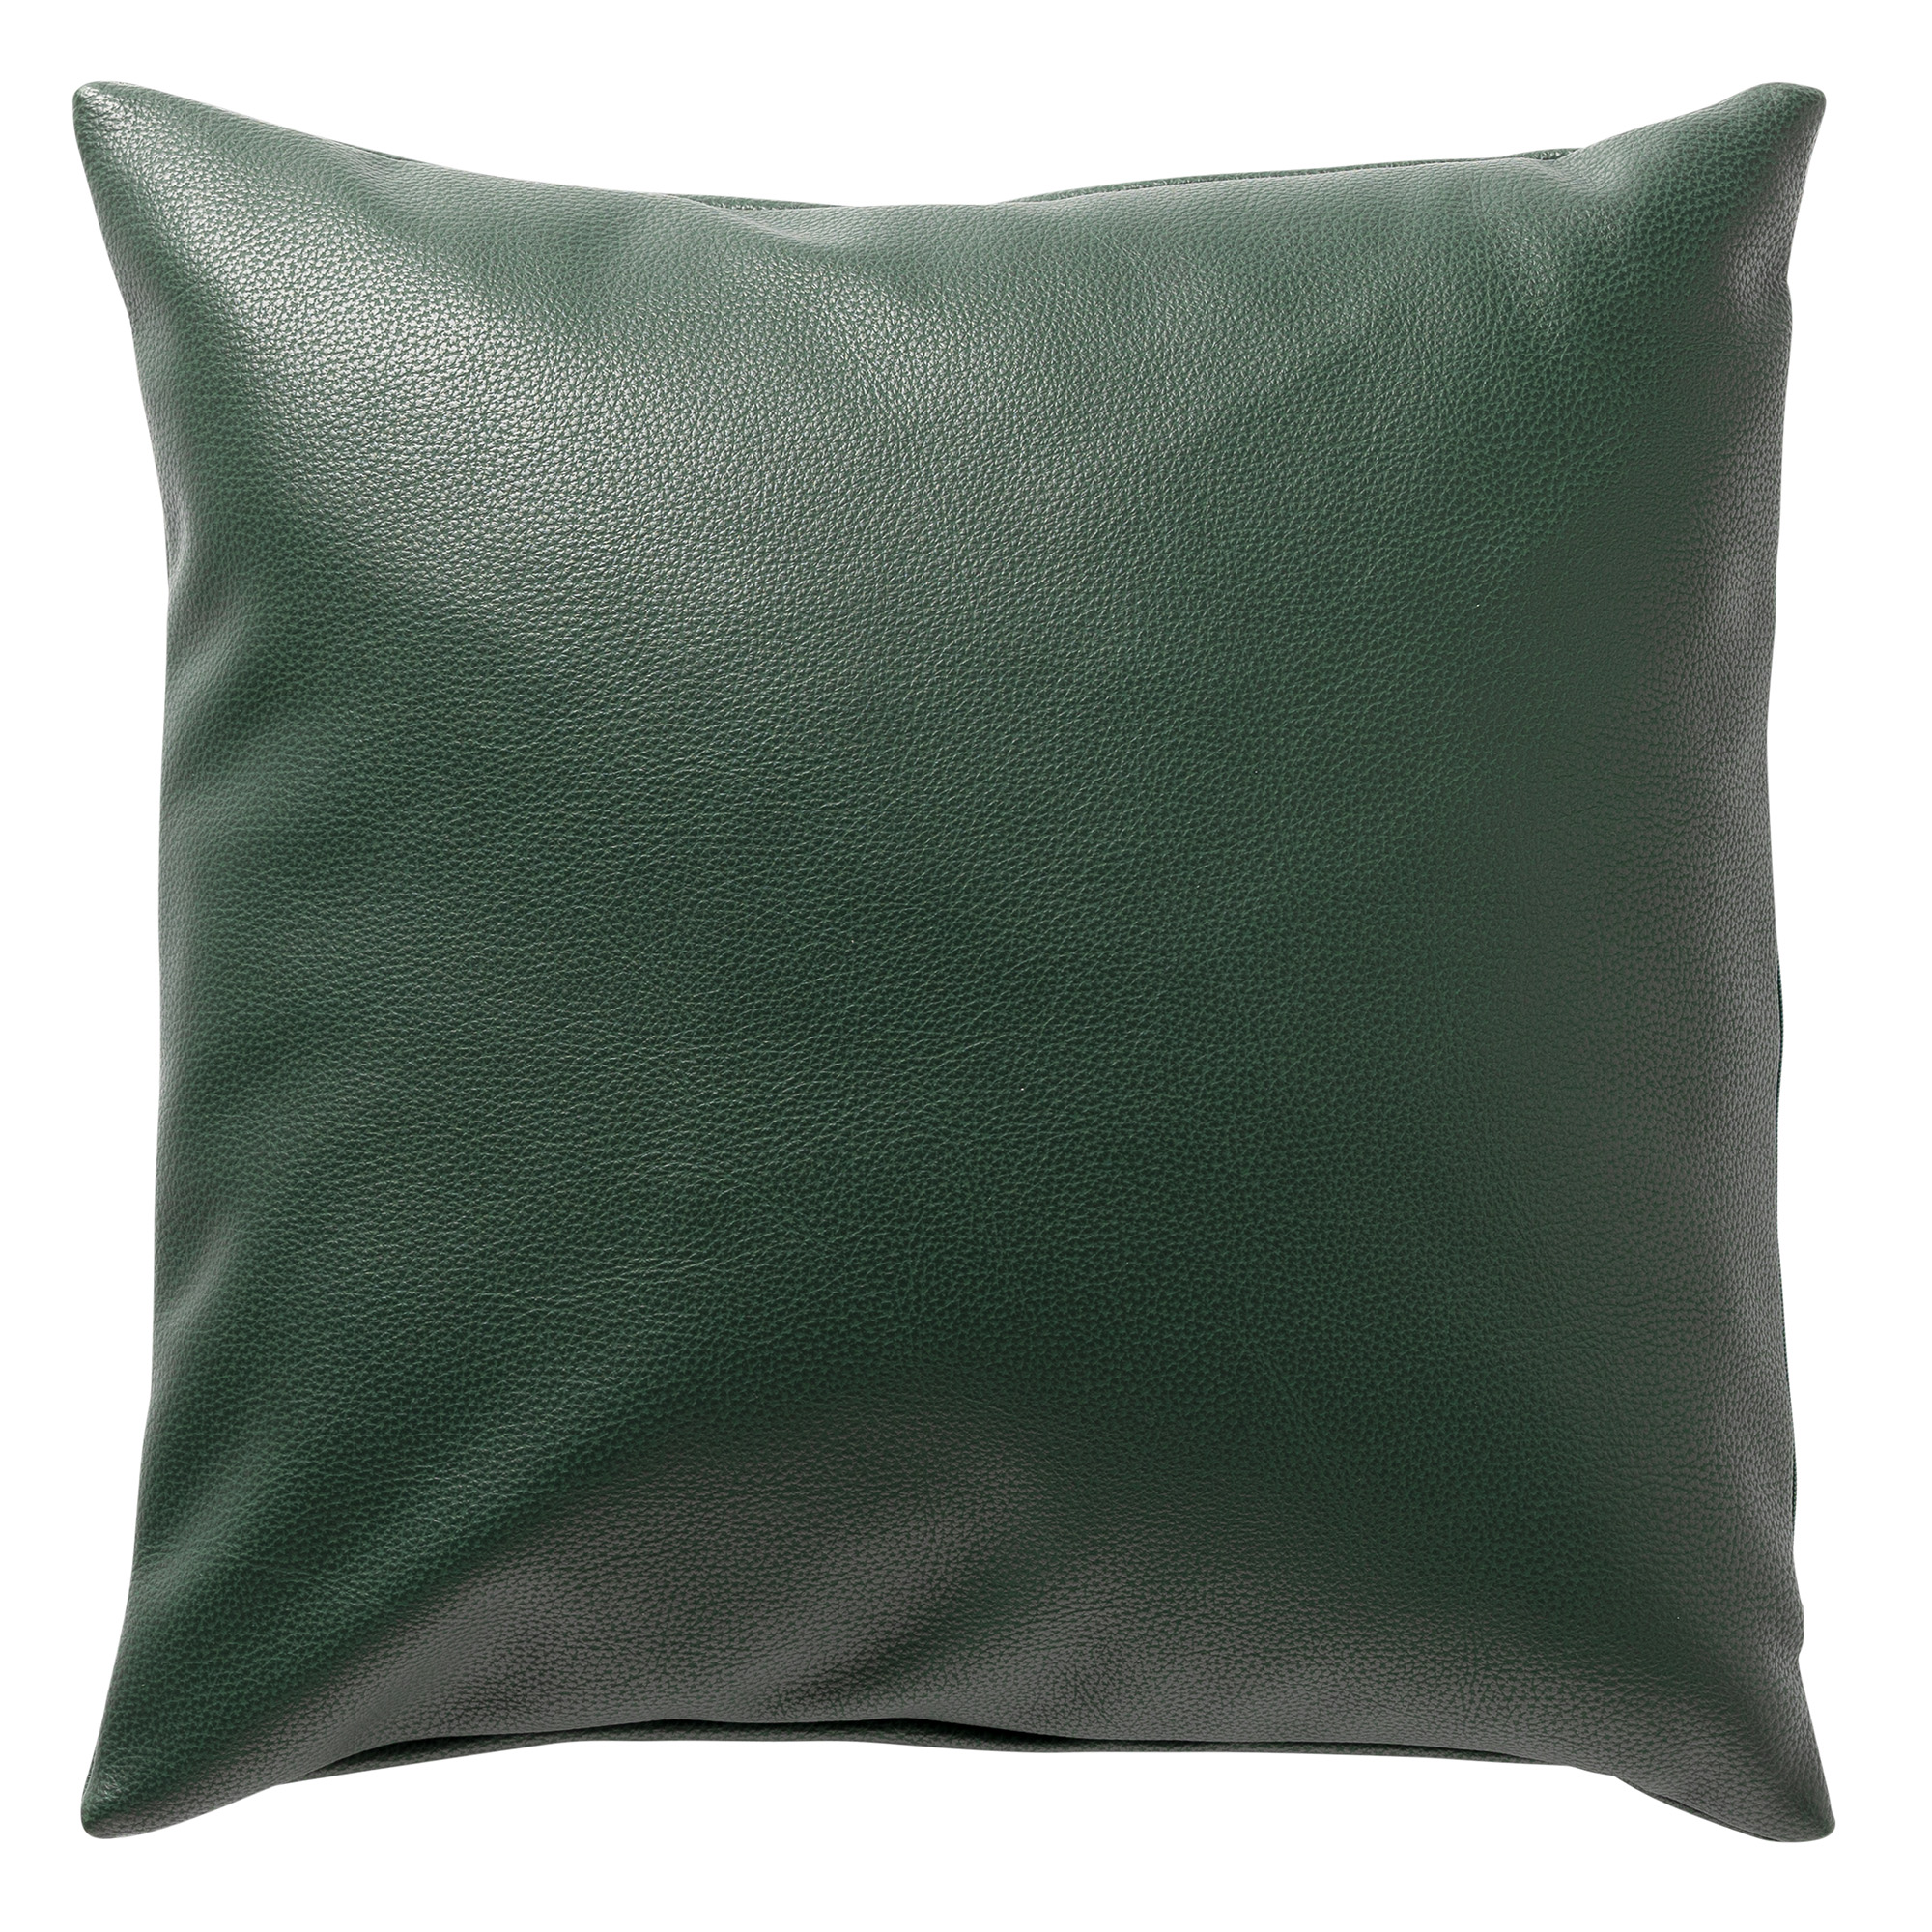 JARED - Cushion 45x45 cm - leather look - solid colour - Garden Topiary - green